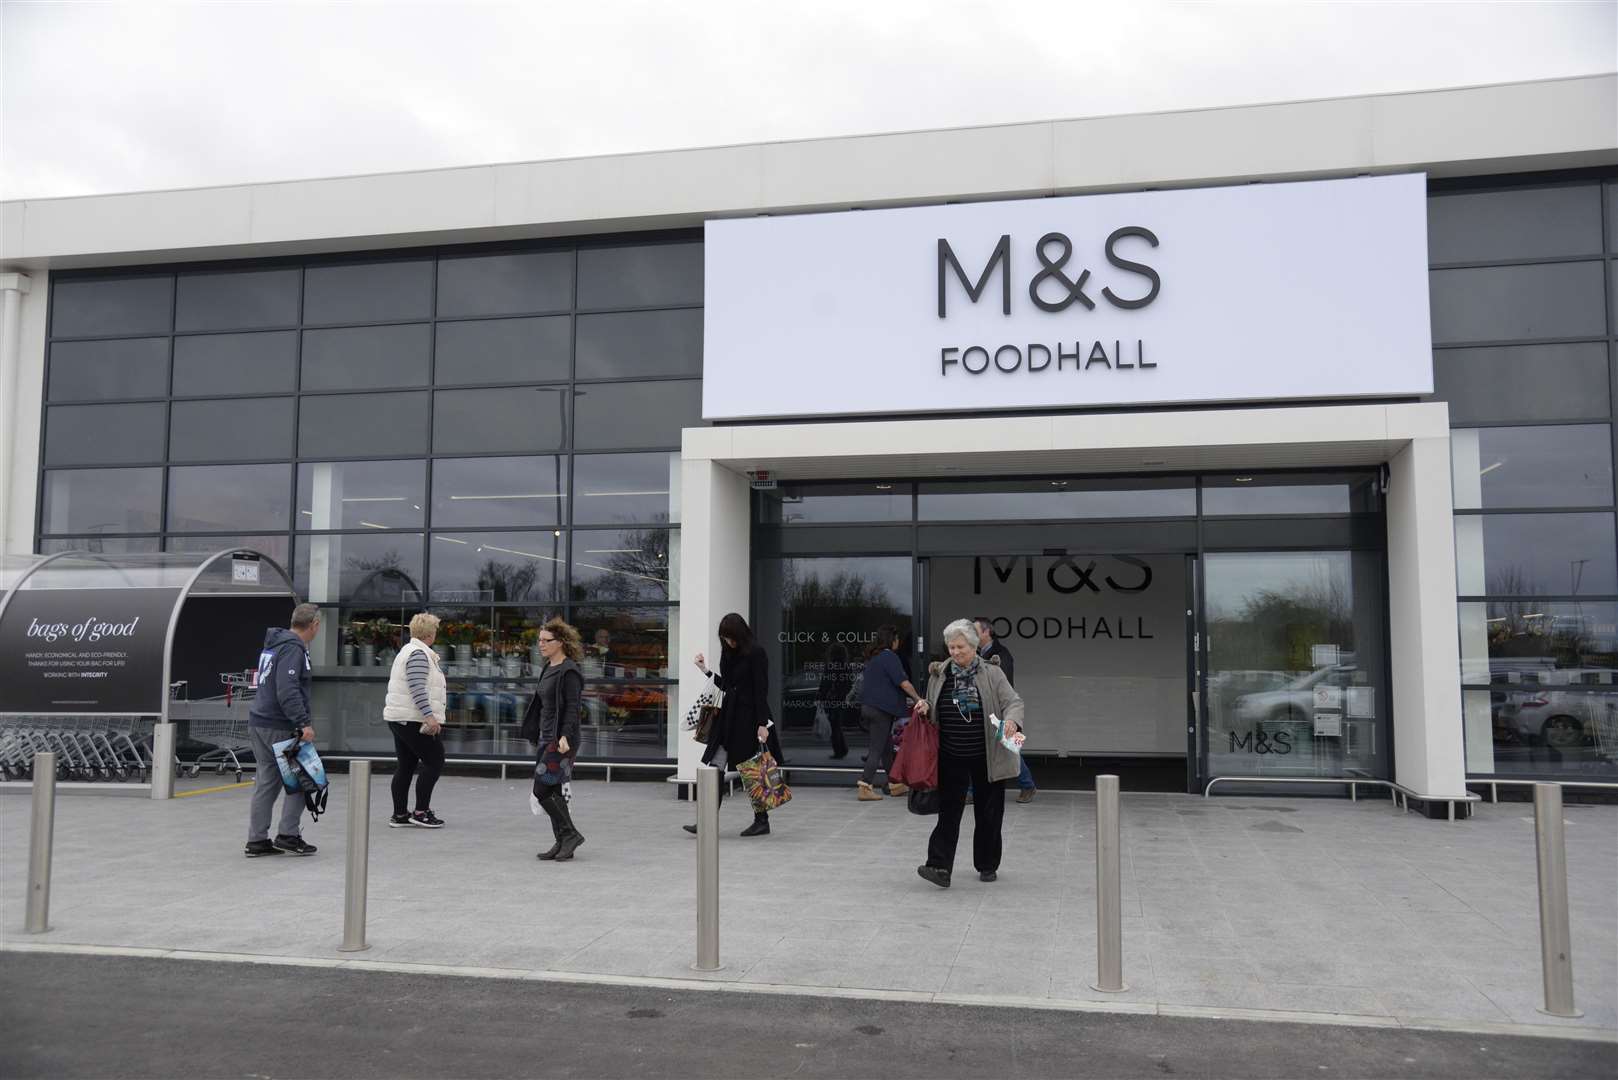 The Marks & Spencer Food Hall in Whitstable